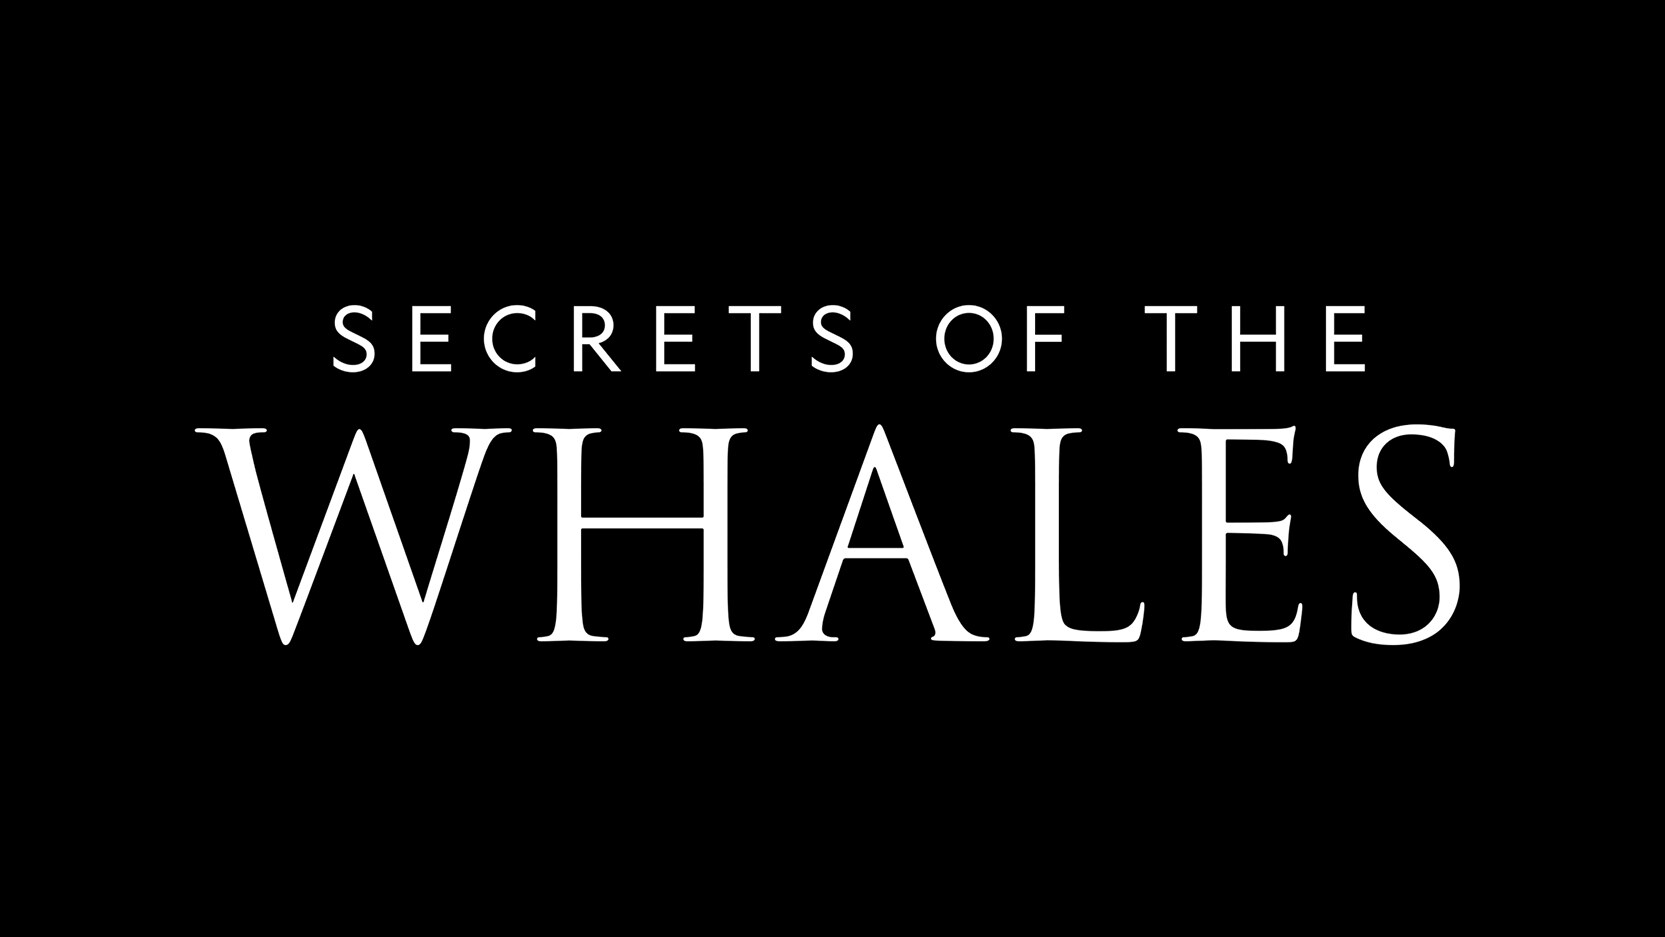 FOR THE FIRST TIME, A SPERM WHALE CALF IS RECORDED NURSING IN NEW CLIP FROM THE DISNEY+ ORIGINAL SERIES “SECRETS OF THE WHALES” 